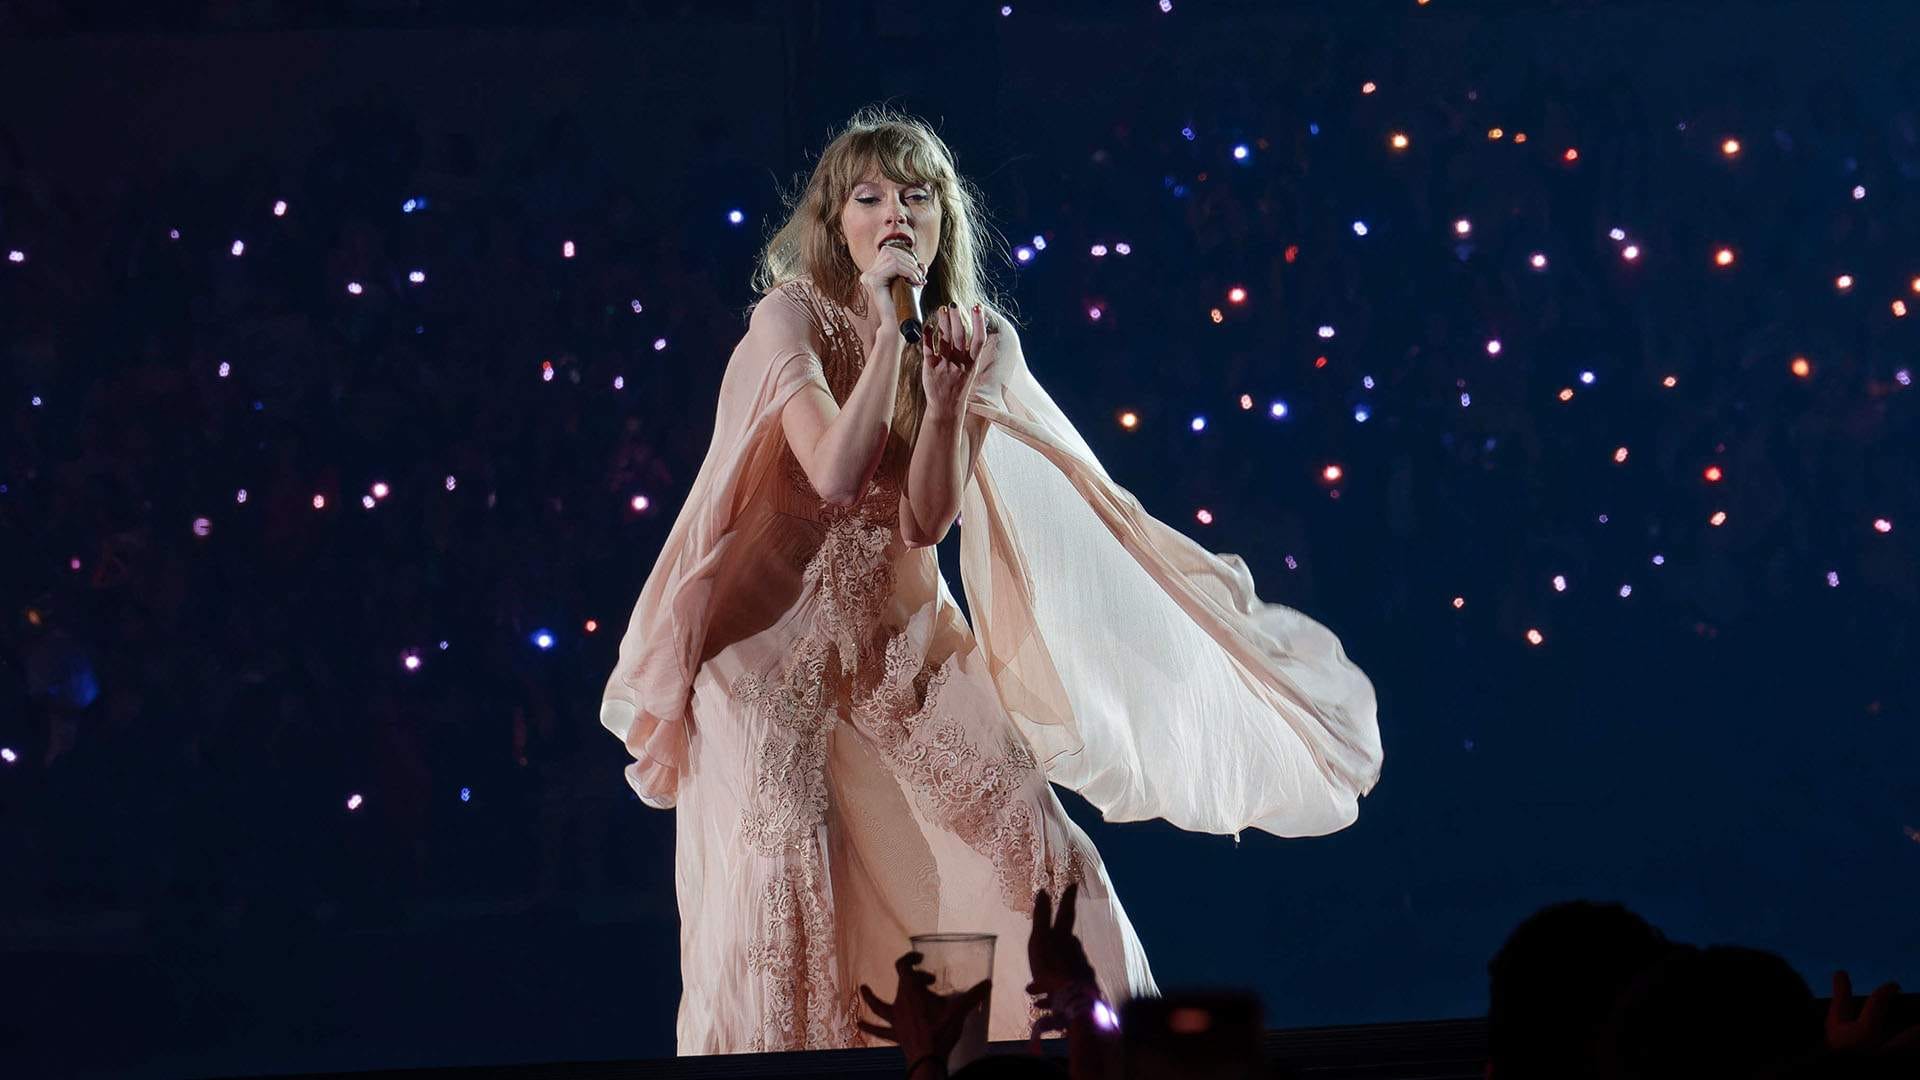 New Poll Reveals Taylor Swift's Potent Influence on Electoral Preferences, with Nearly a Fifth of Voters More Likely to Support Her Endorsed Candidates